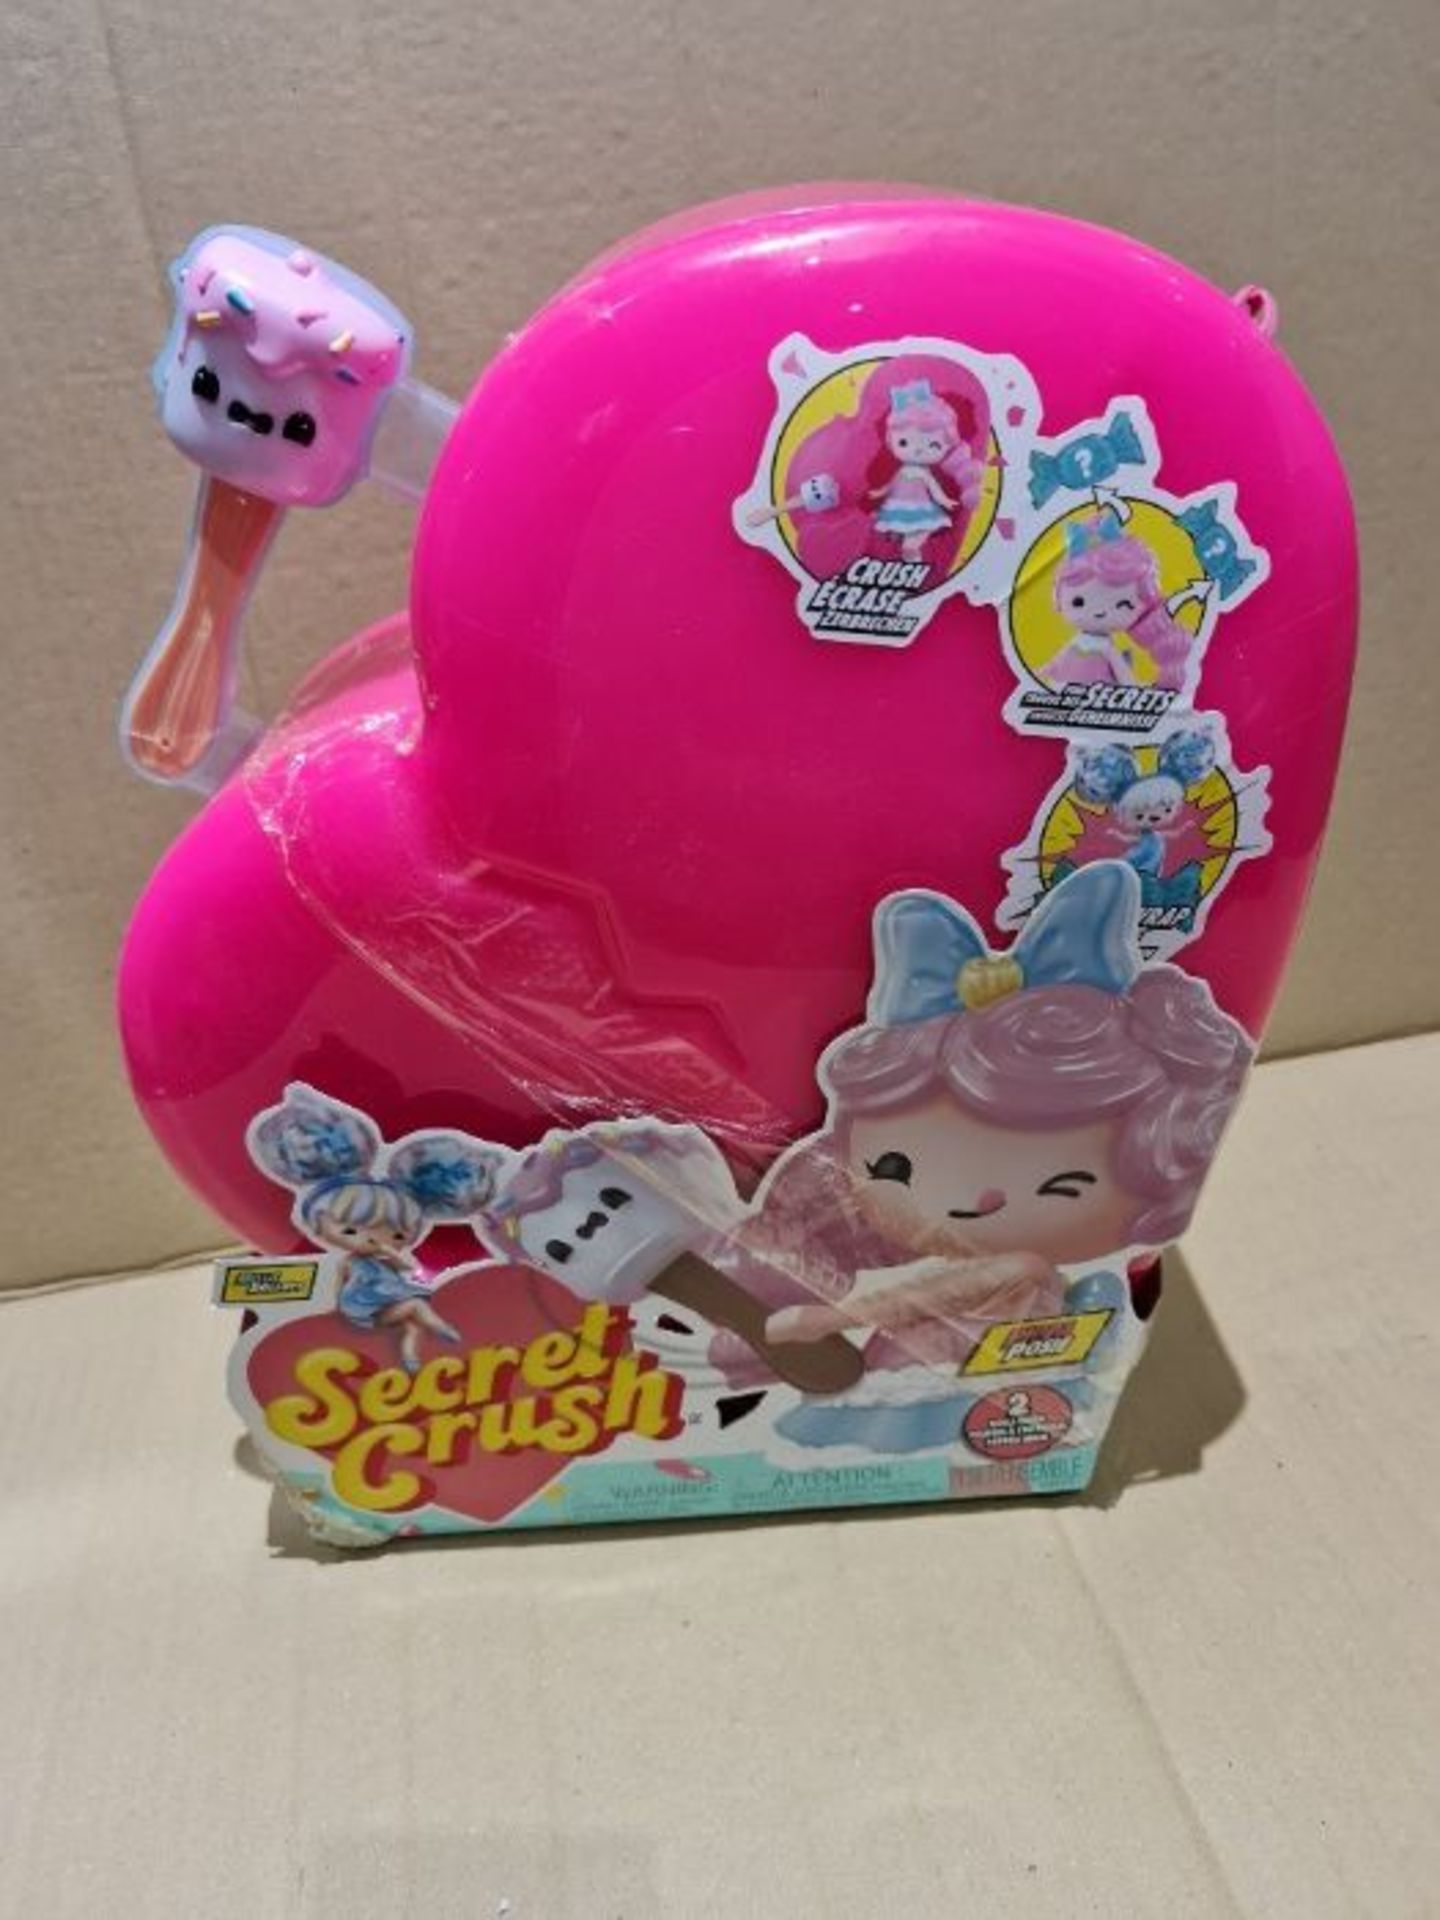 Secret Crush Collectable Dolls for Girls - Unwrap Surprises & Accessories - Pippa Posi - Image 2 of 2